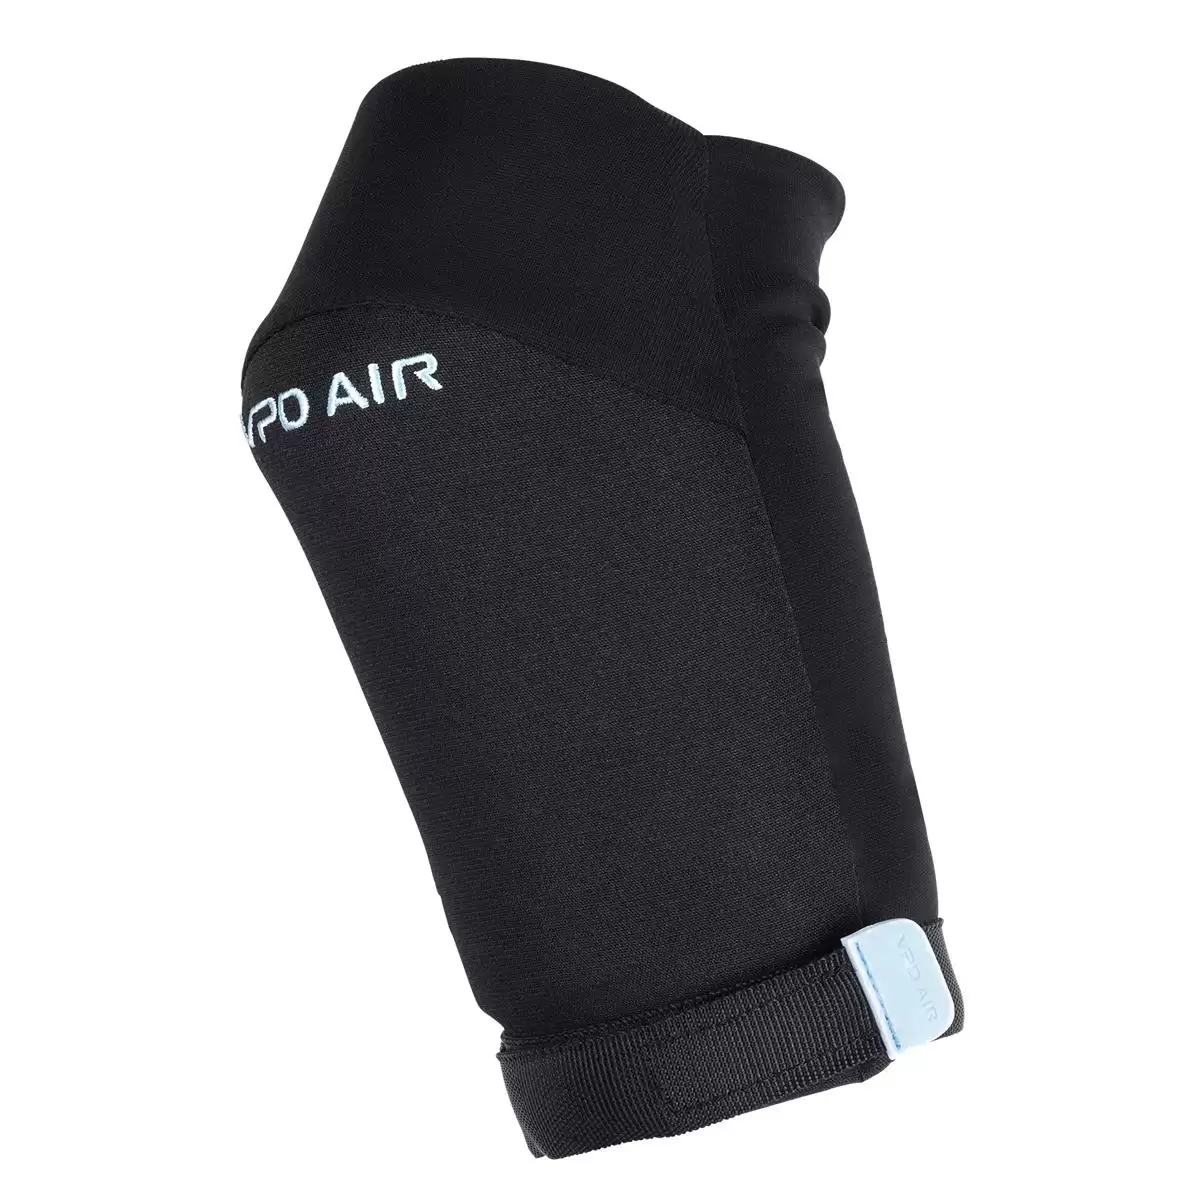 Joint VPD Air Elbow pads black size XS #1